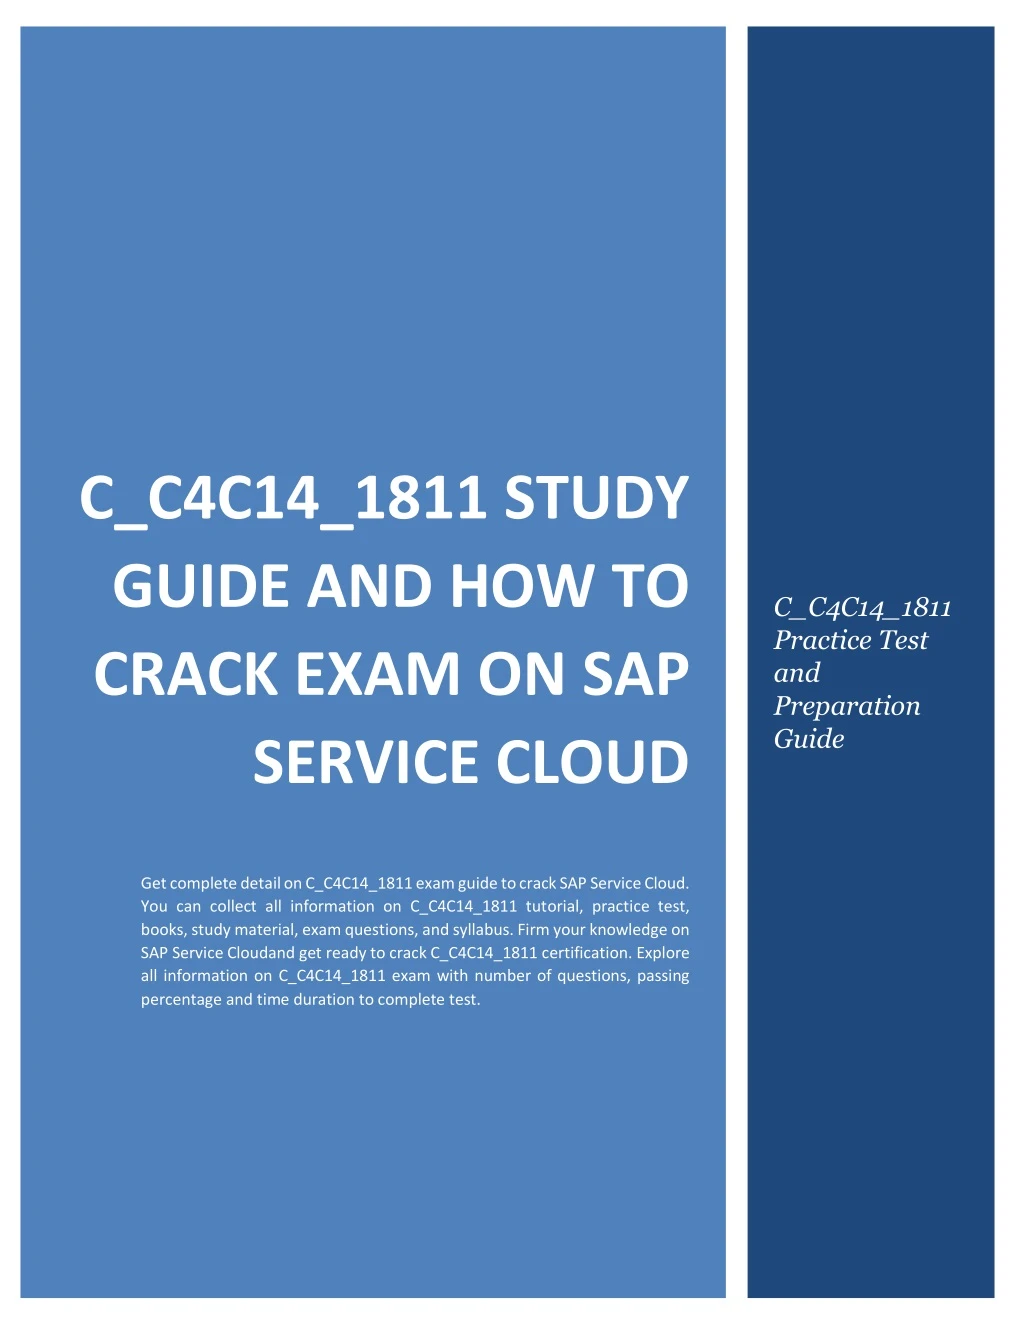 c c4c14 1811 study guide and how to crack exam